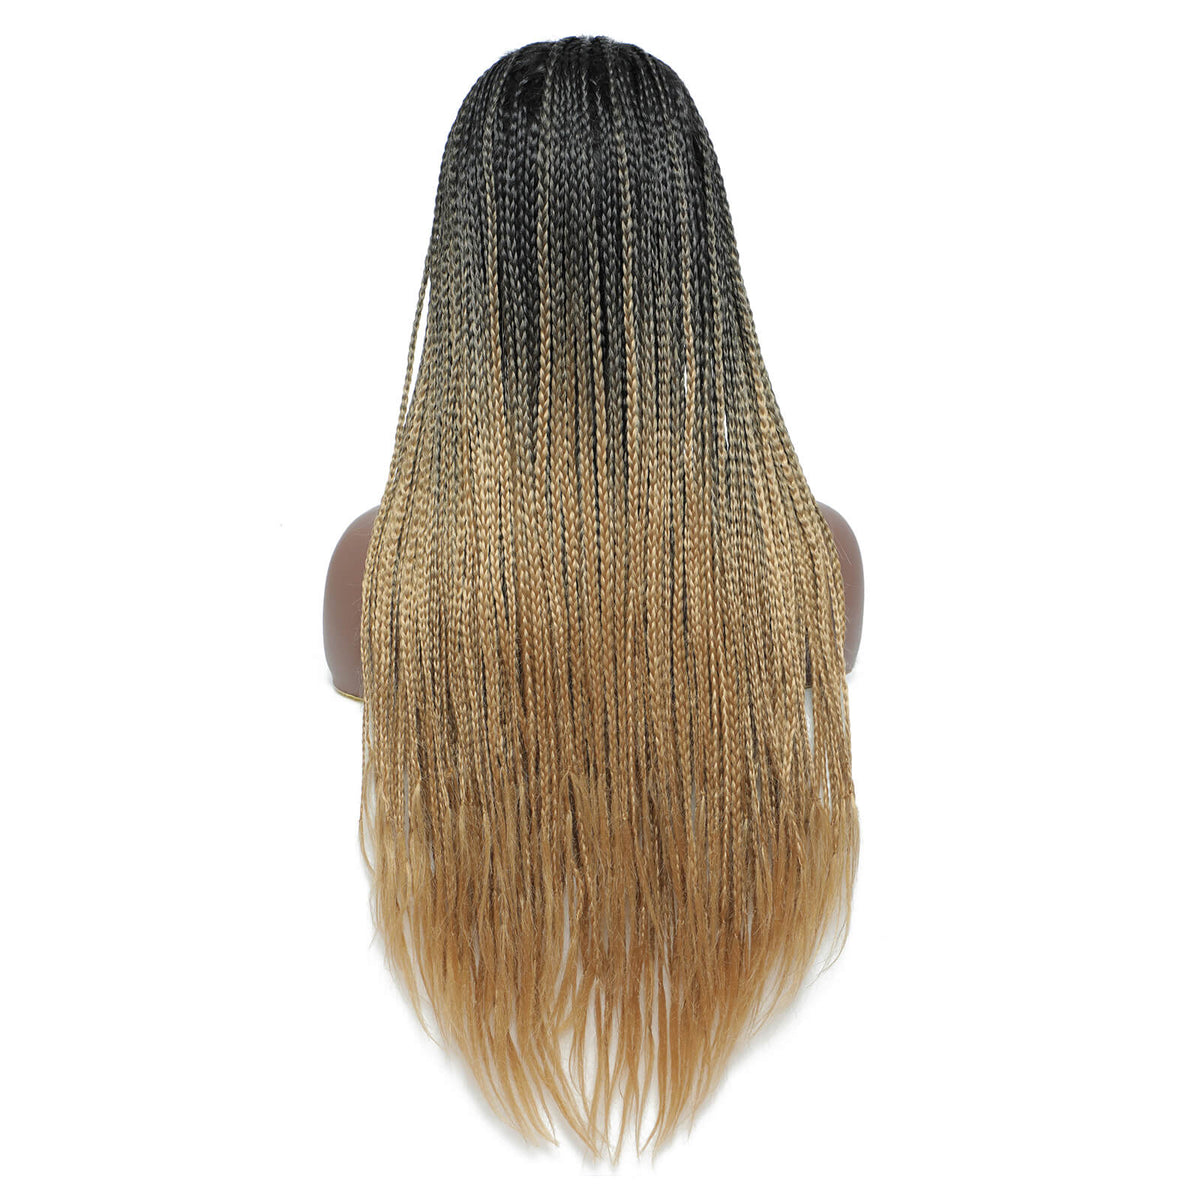 Rosebony Box Braided Wigs for Black Women 24 Inch Ombre Blonde Braids Product Back Side Show